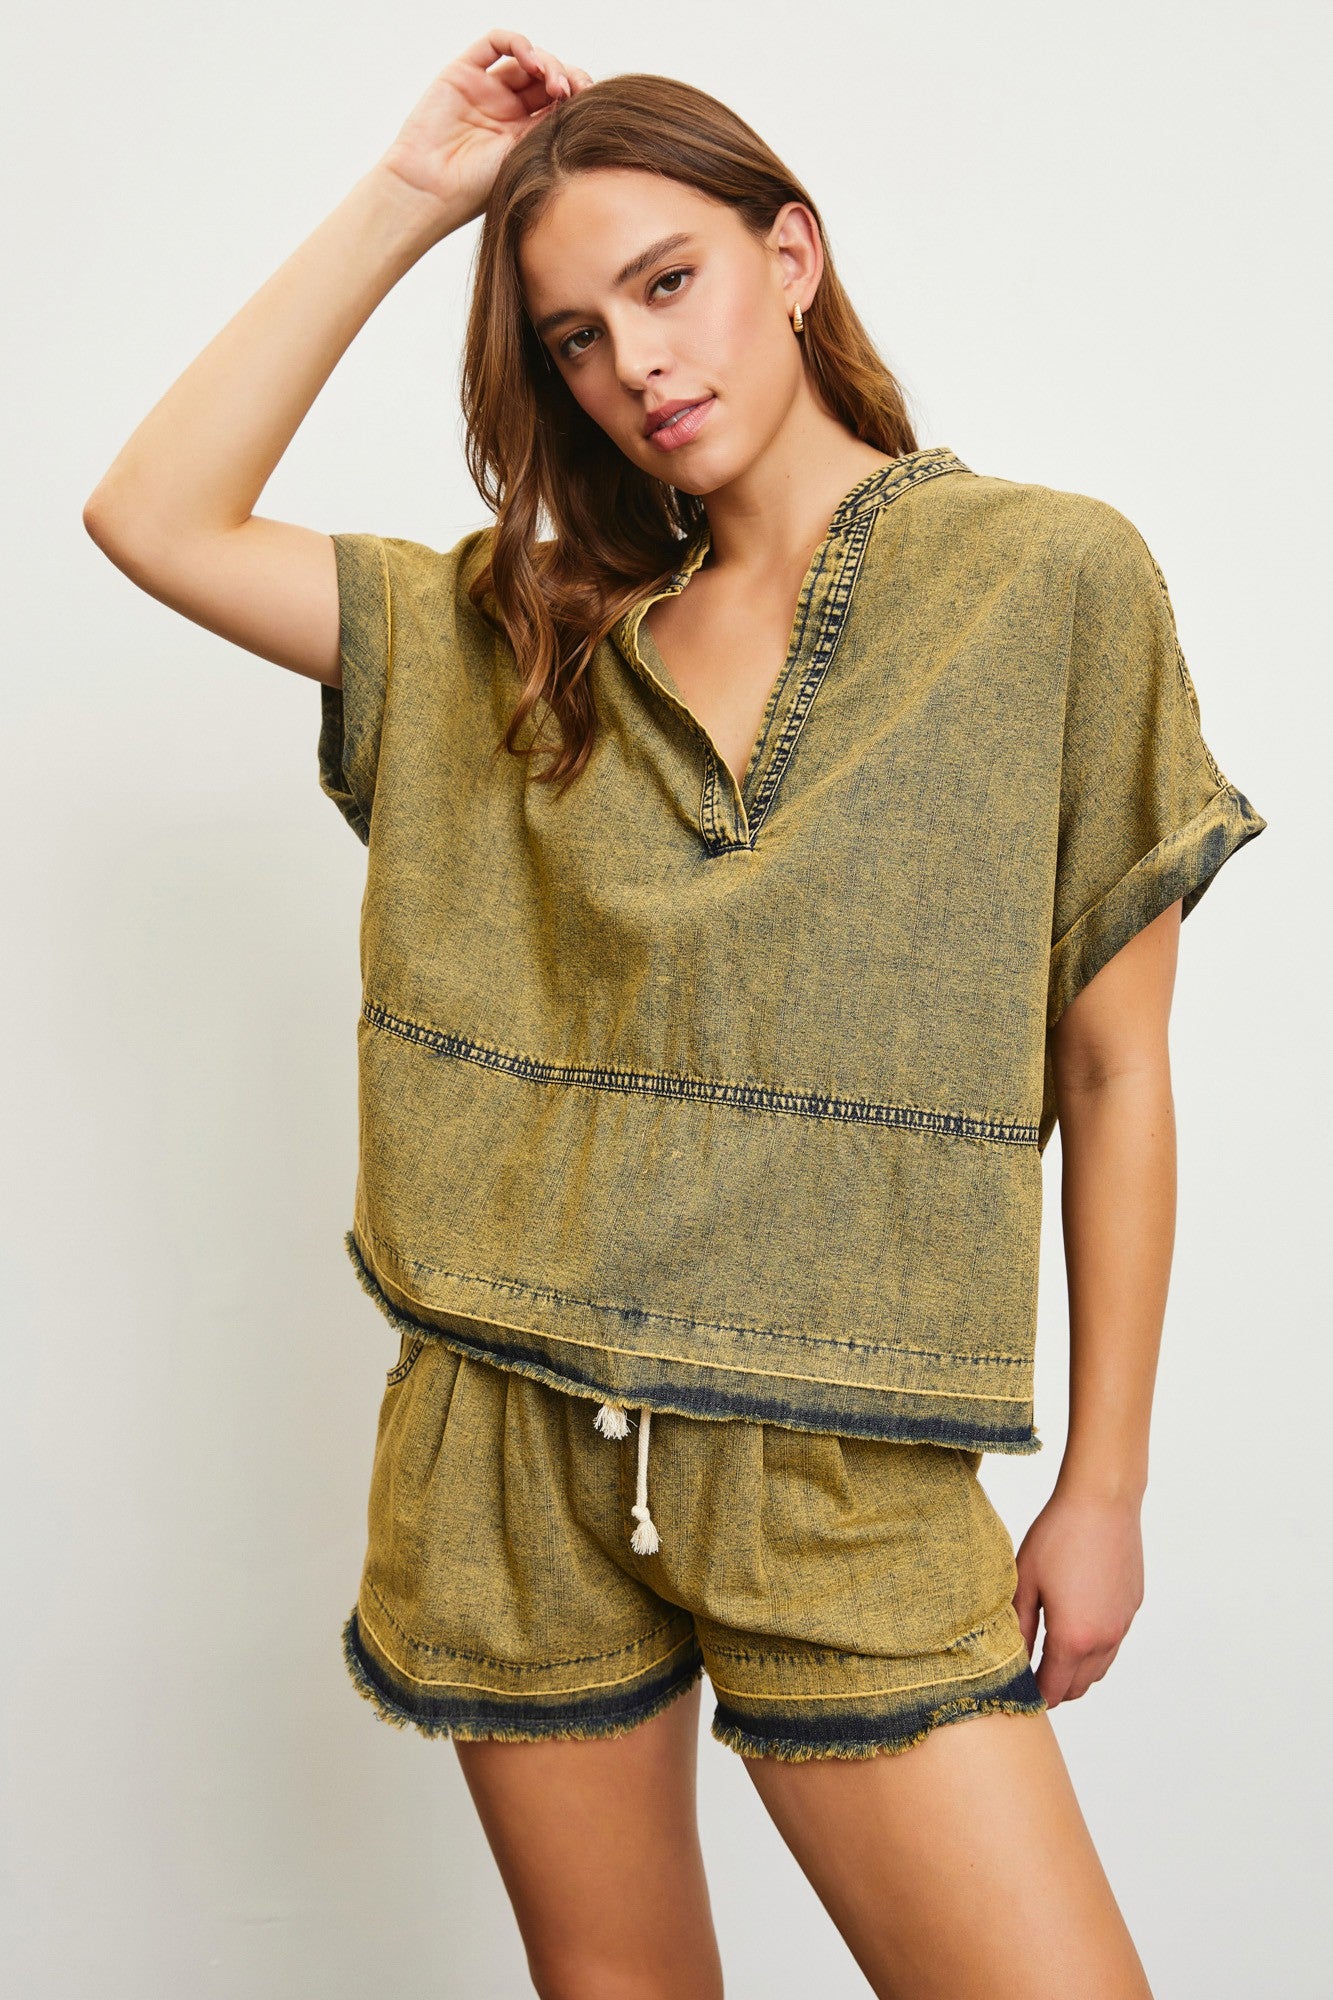 JAC V-NECK TOP IN OVERDYED GREEN